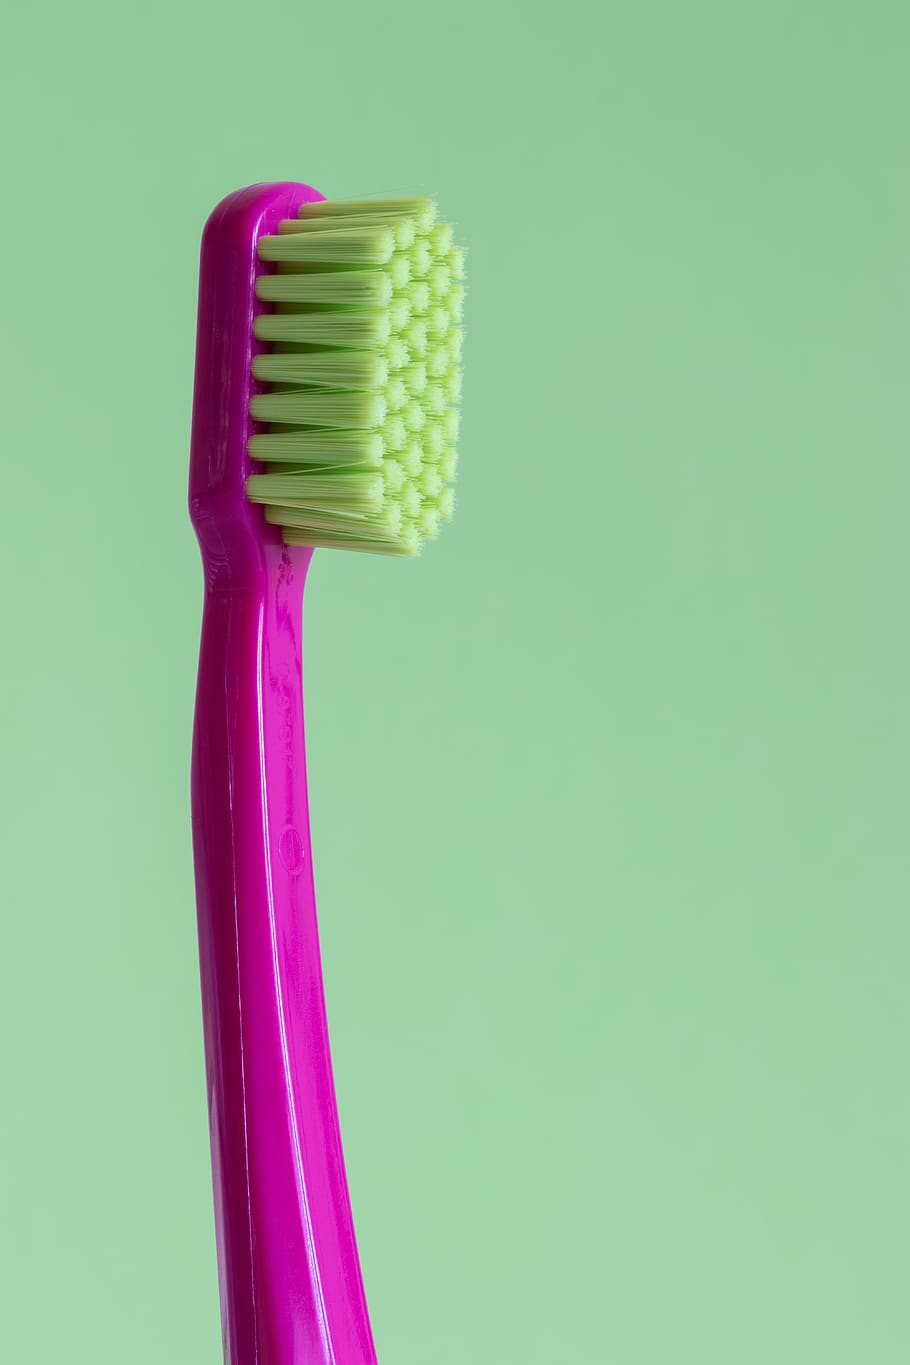 purple and green toothbrush, studio shot, indoors, colored background, HD wallpaper